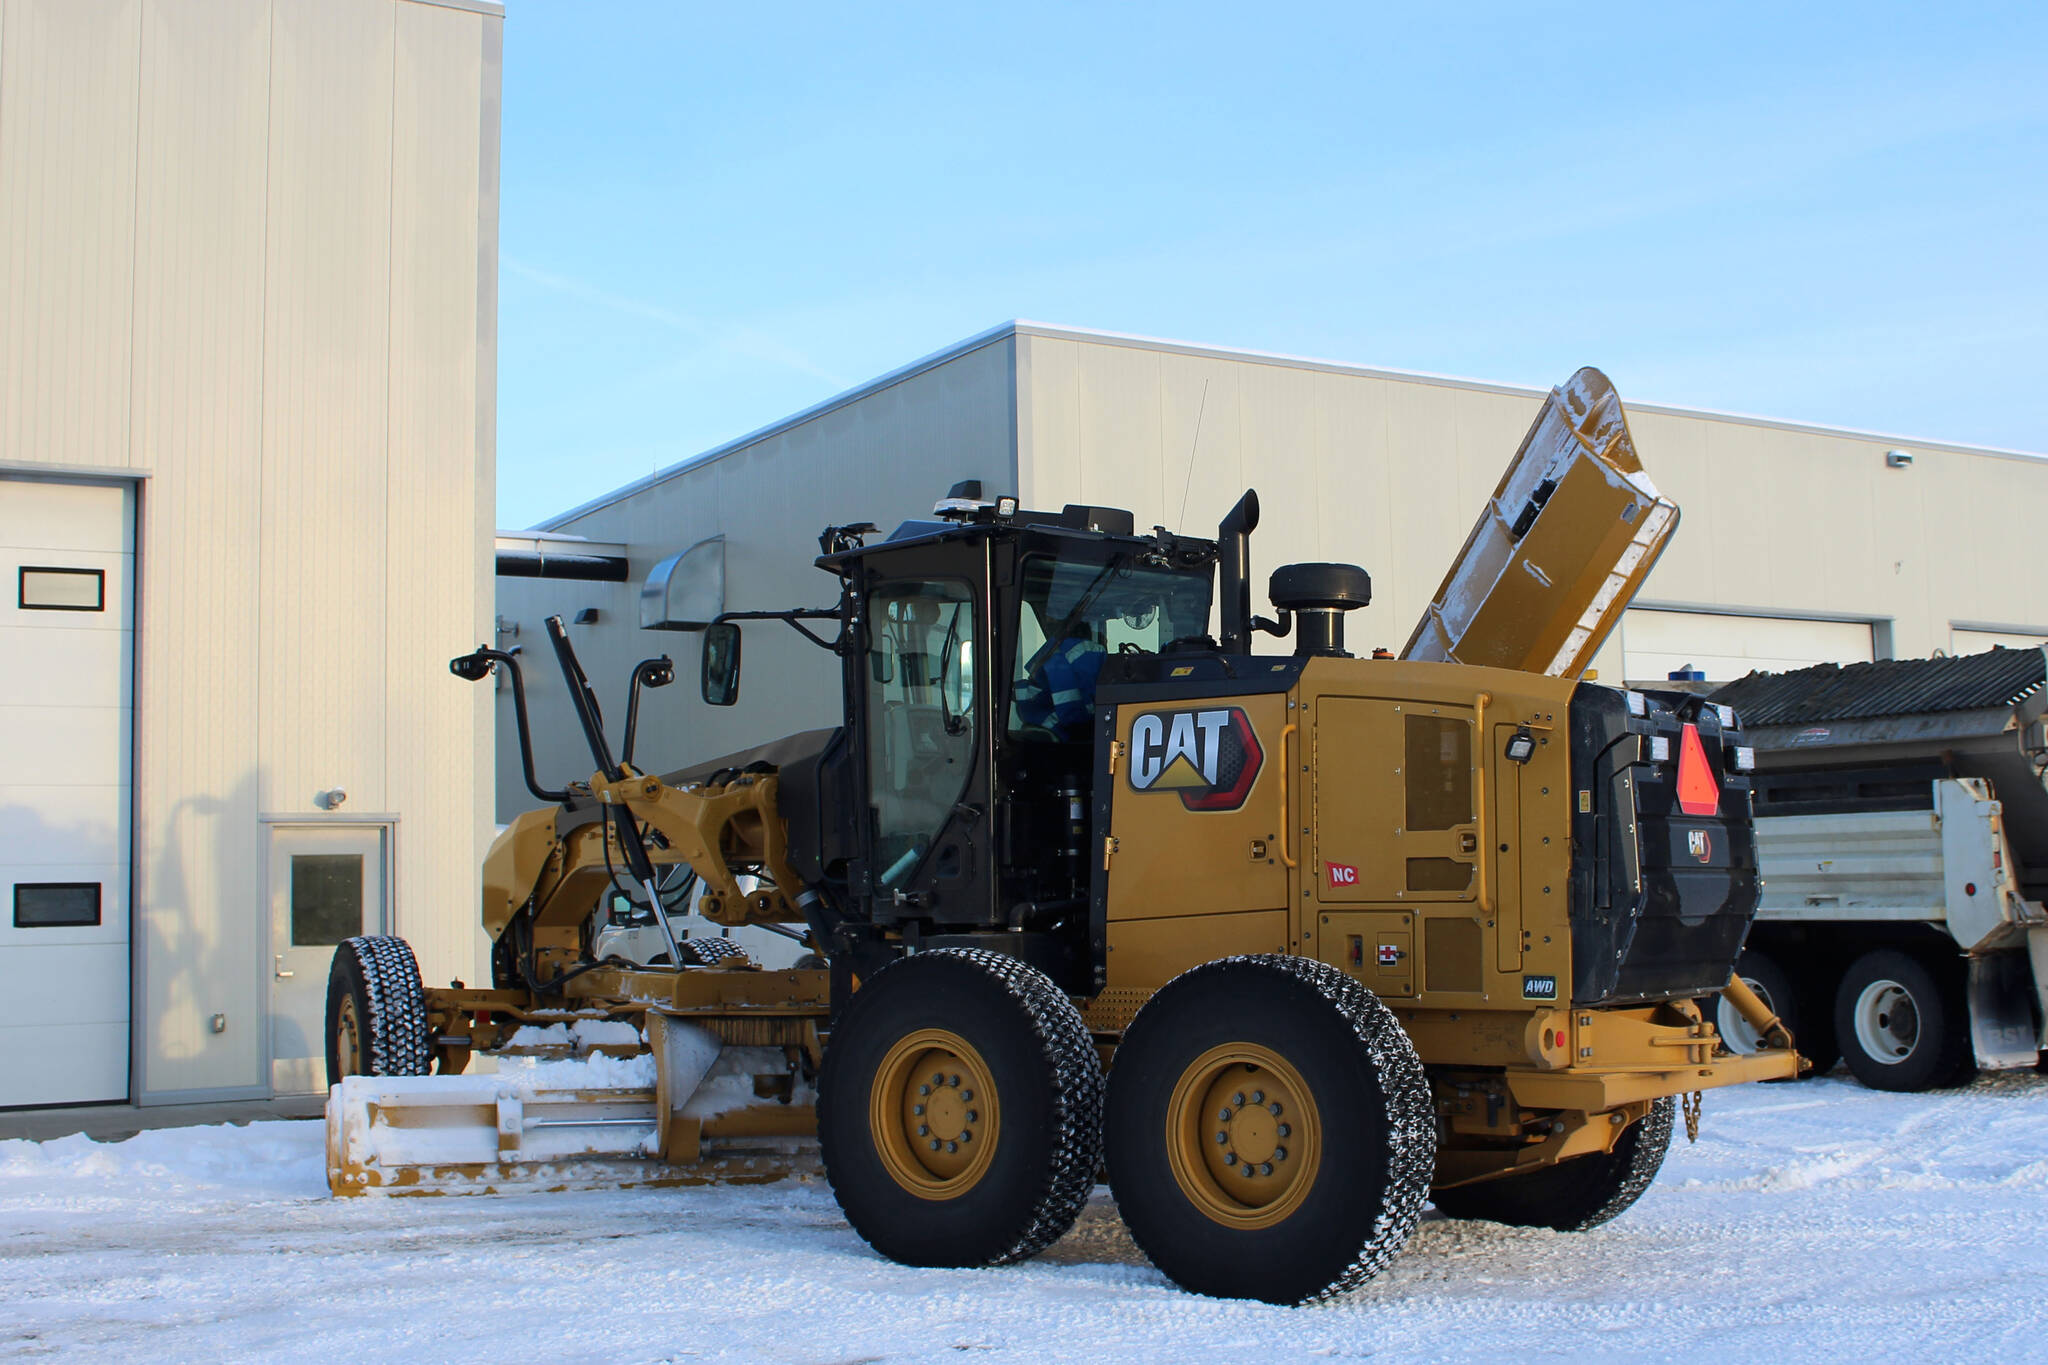 A grader owned by the City of Kenai is parked outside of the city shop on Wednesday, Dec. 7, 2022, in Kenai, Alaska. (Ashlyn O’Hara/Peninsula Clarion)